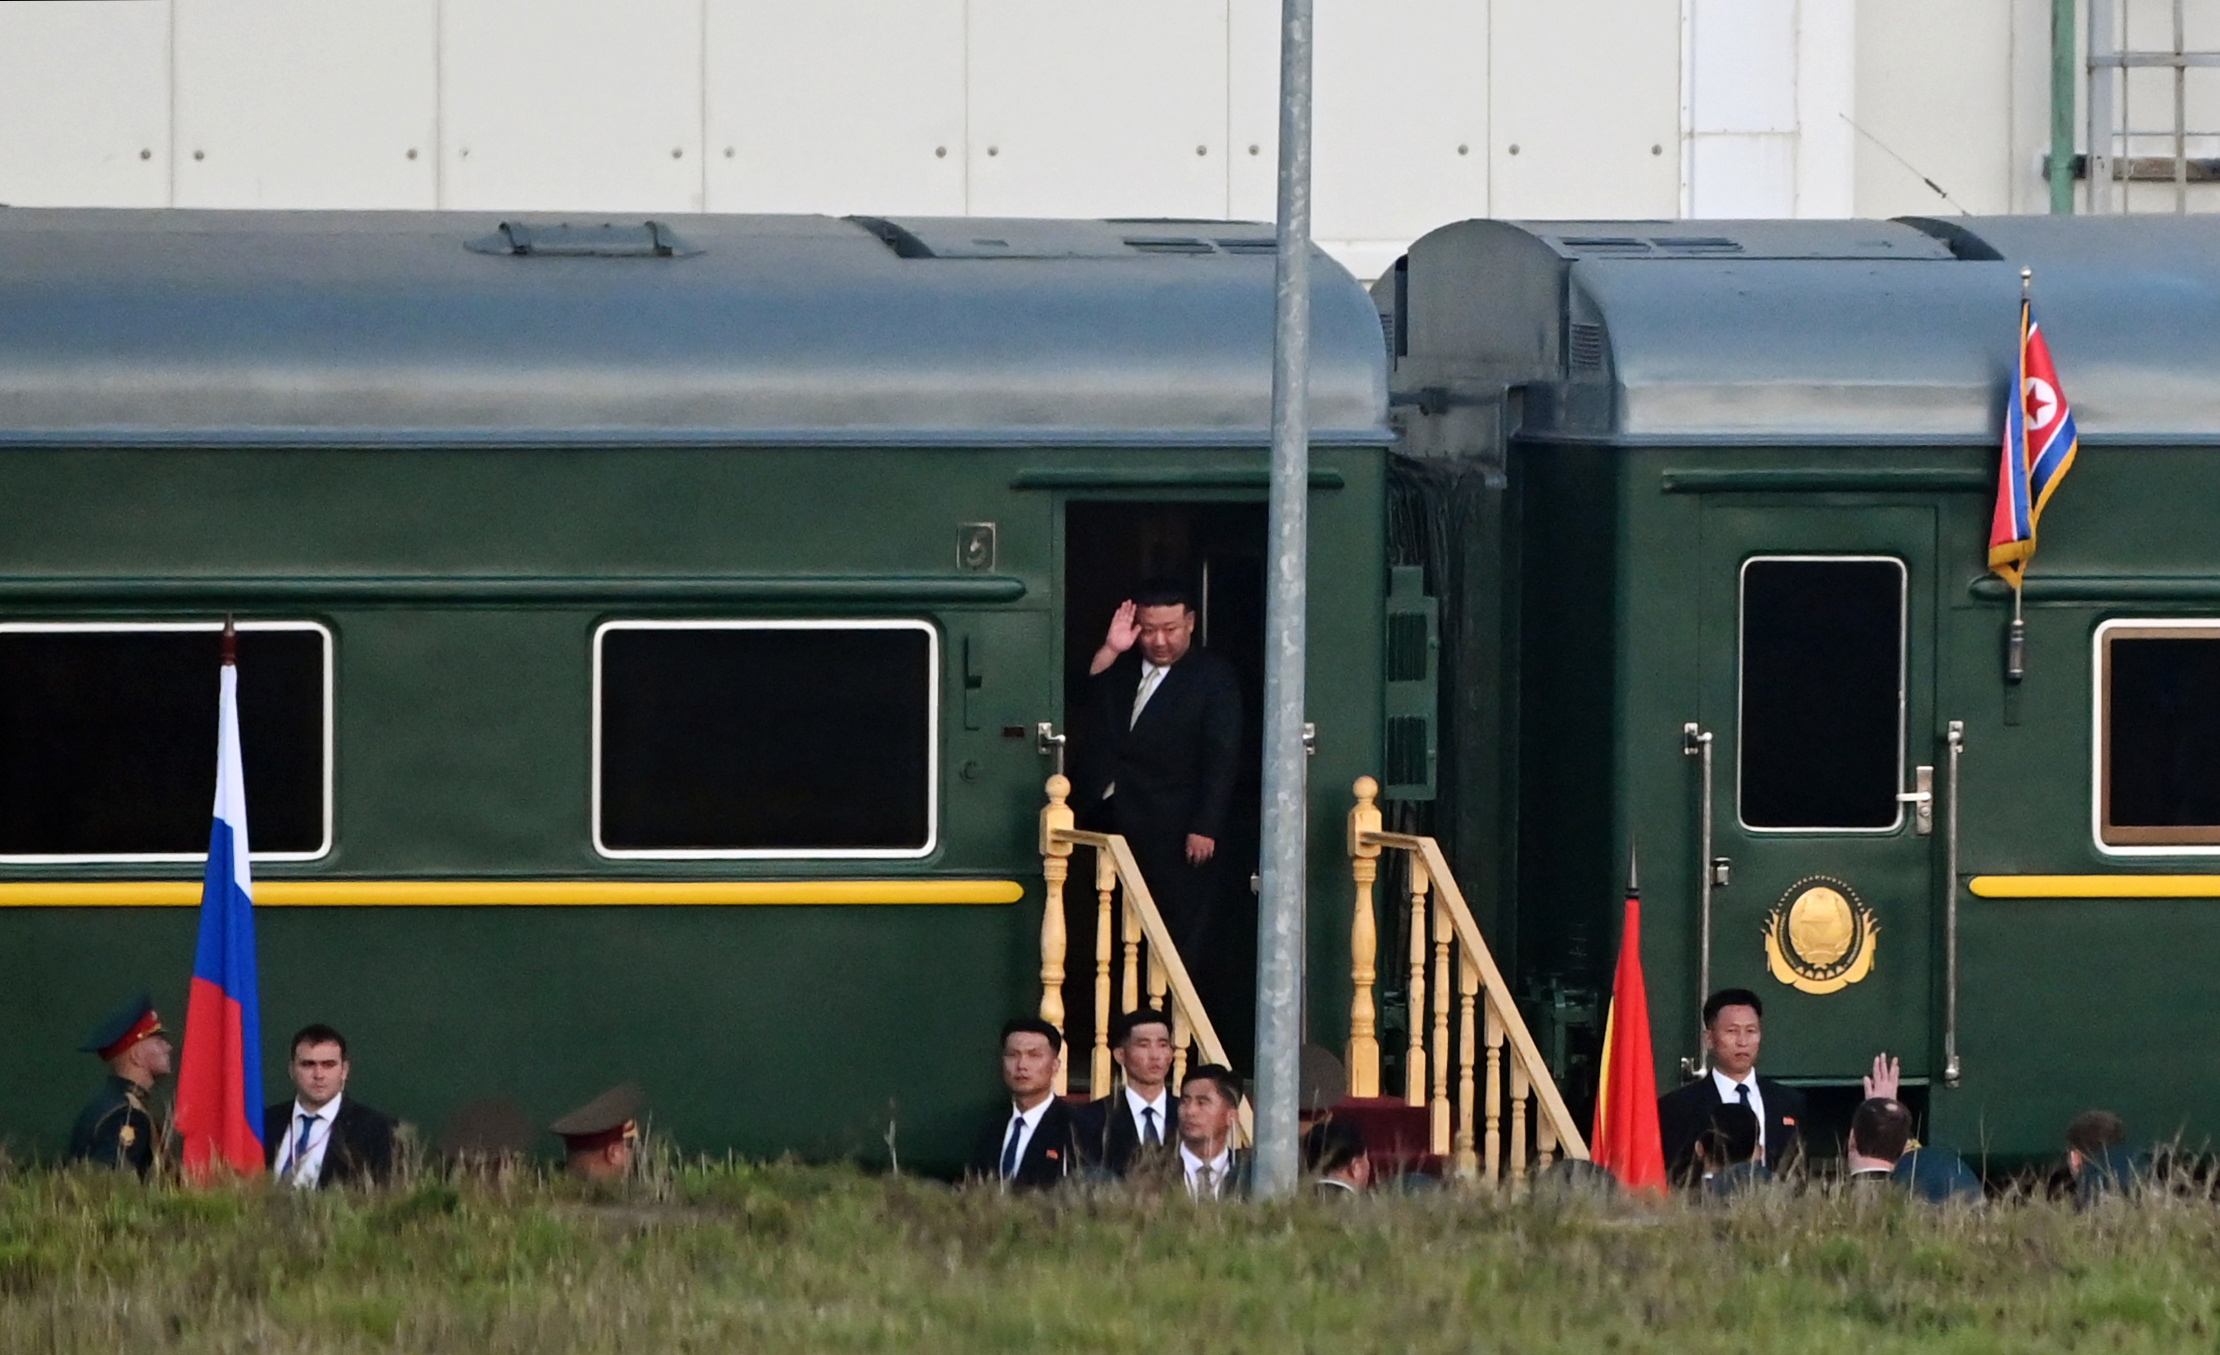 epa10858230 North Korean leader Kim Jong Un boards a train after a meeting with Russian President Vladimir Putin at the Vostochny cosmodrome outside of the town of Tsiolkovsky (former Uglegorsk), some 180 km north of Blagoveschensk in Amur region, Russia, 13 September 2023.  EPA/PAVEL BYRKIN / SPUTNIK / KREMLIN POOL MANDATORY CREDIT